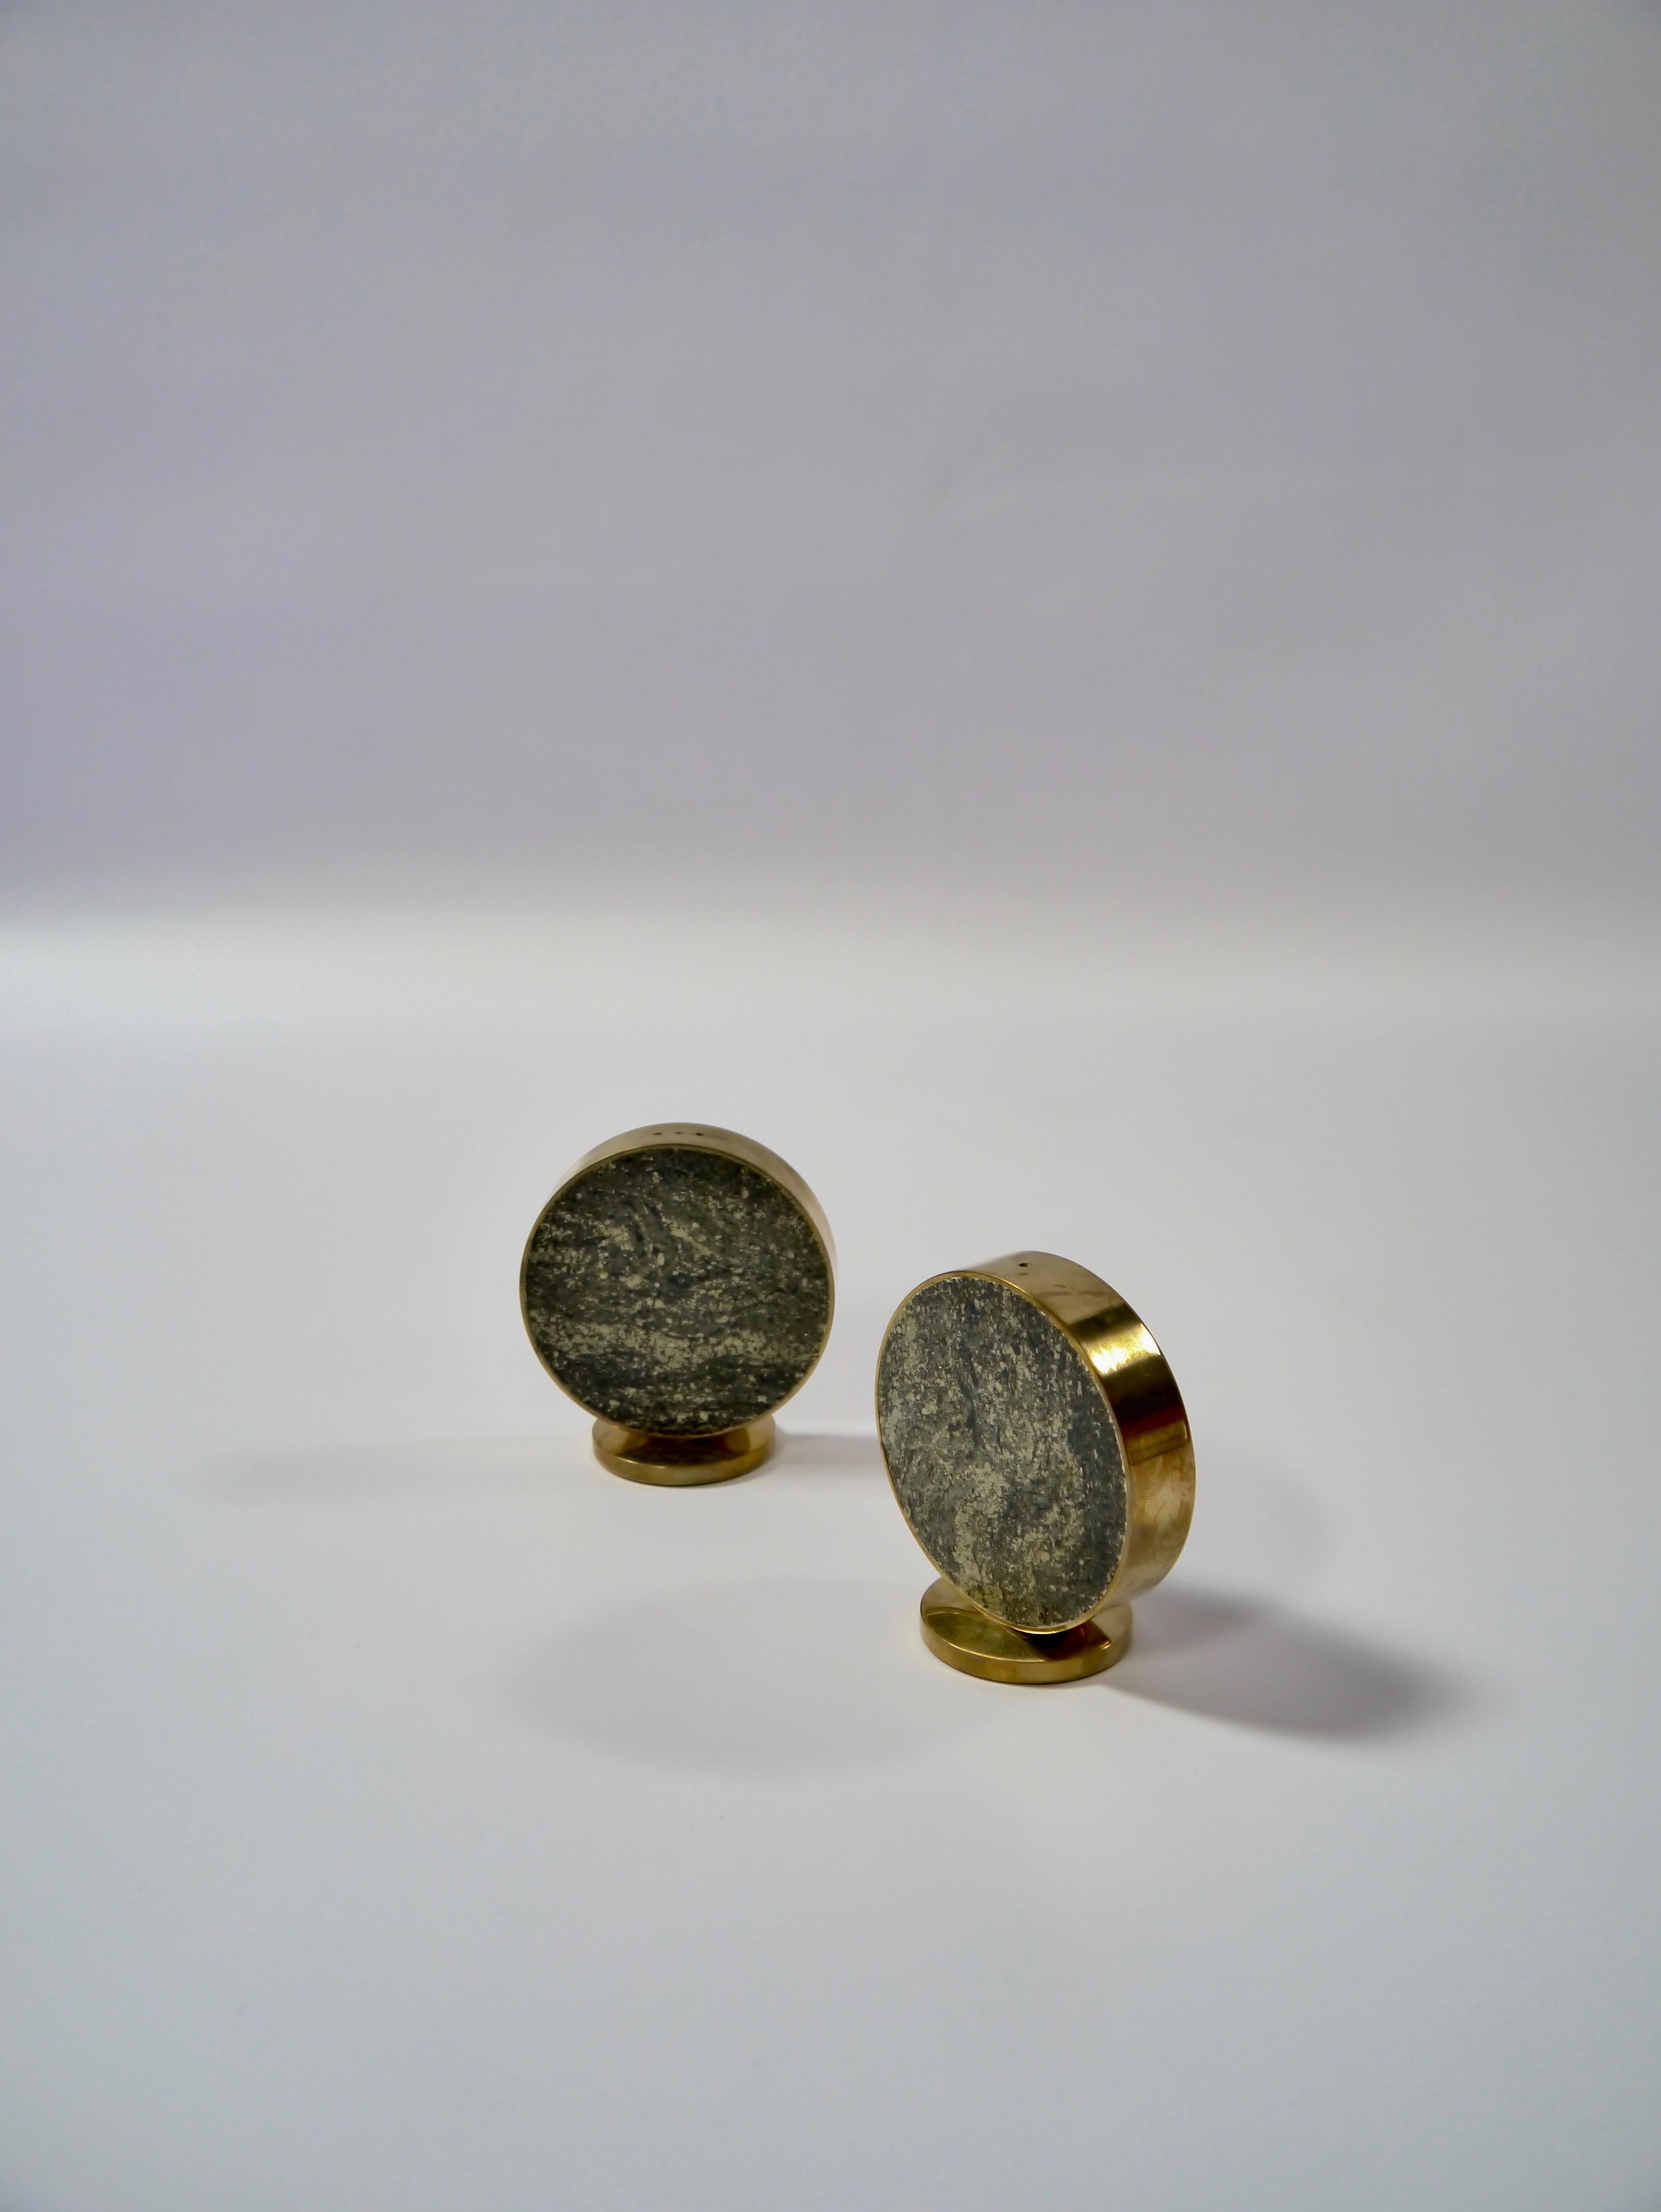 Salt and pepper shakers made by Saulo, Norway, 1960s. Solid brass, and granite from the mines of Sulitjelma in the Norwegian region Laponia.